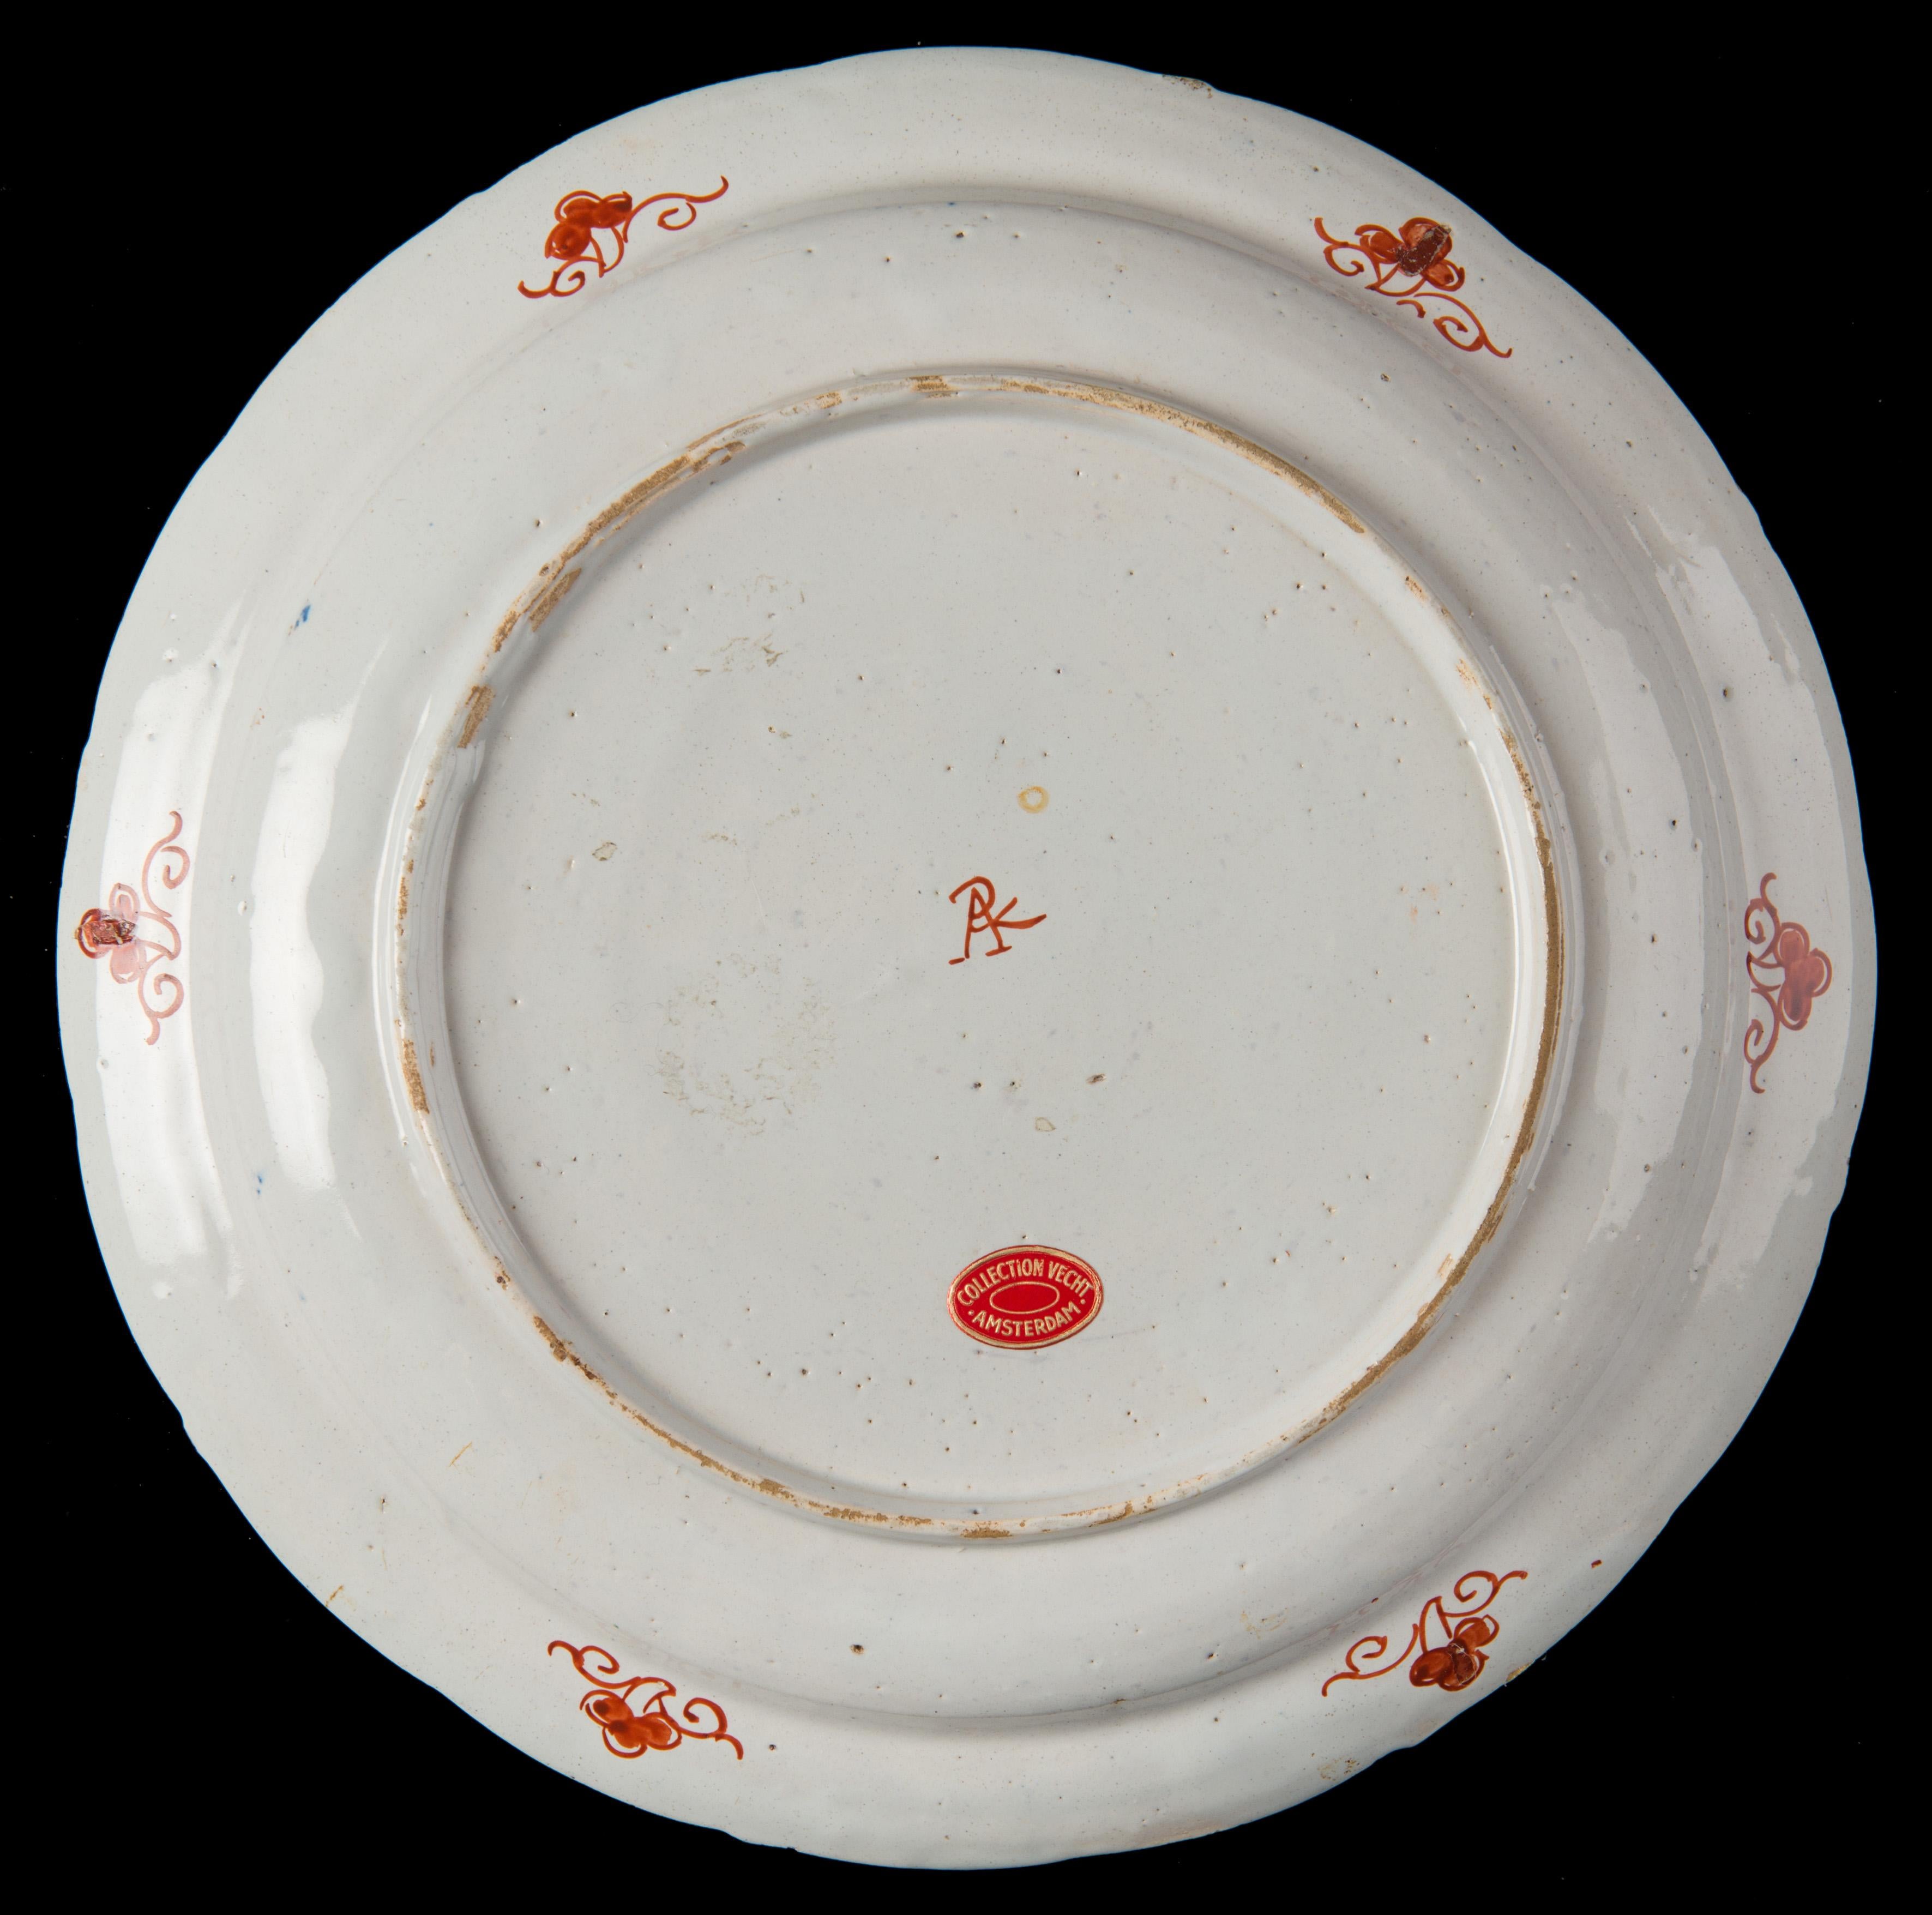 Polychrome and gilded chinoiserie plate. Delft, 1701-1722 The Greek A pottery.
Mark: APK, period of Pieter Kocx (1701-1703) or his widow Johanna van der Heul (1703-1722)

The plate is slightly curved and has a narrow border. The painting is